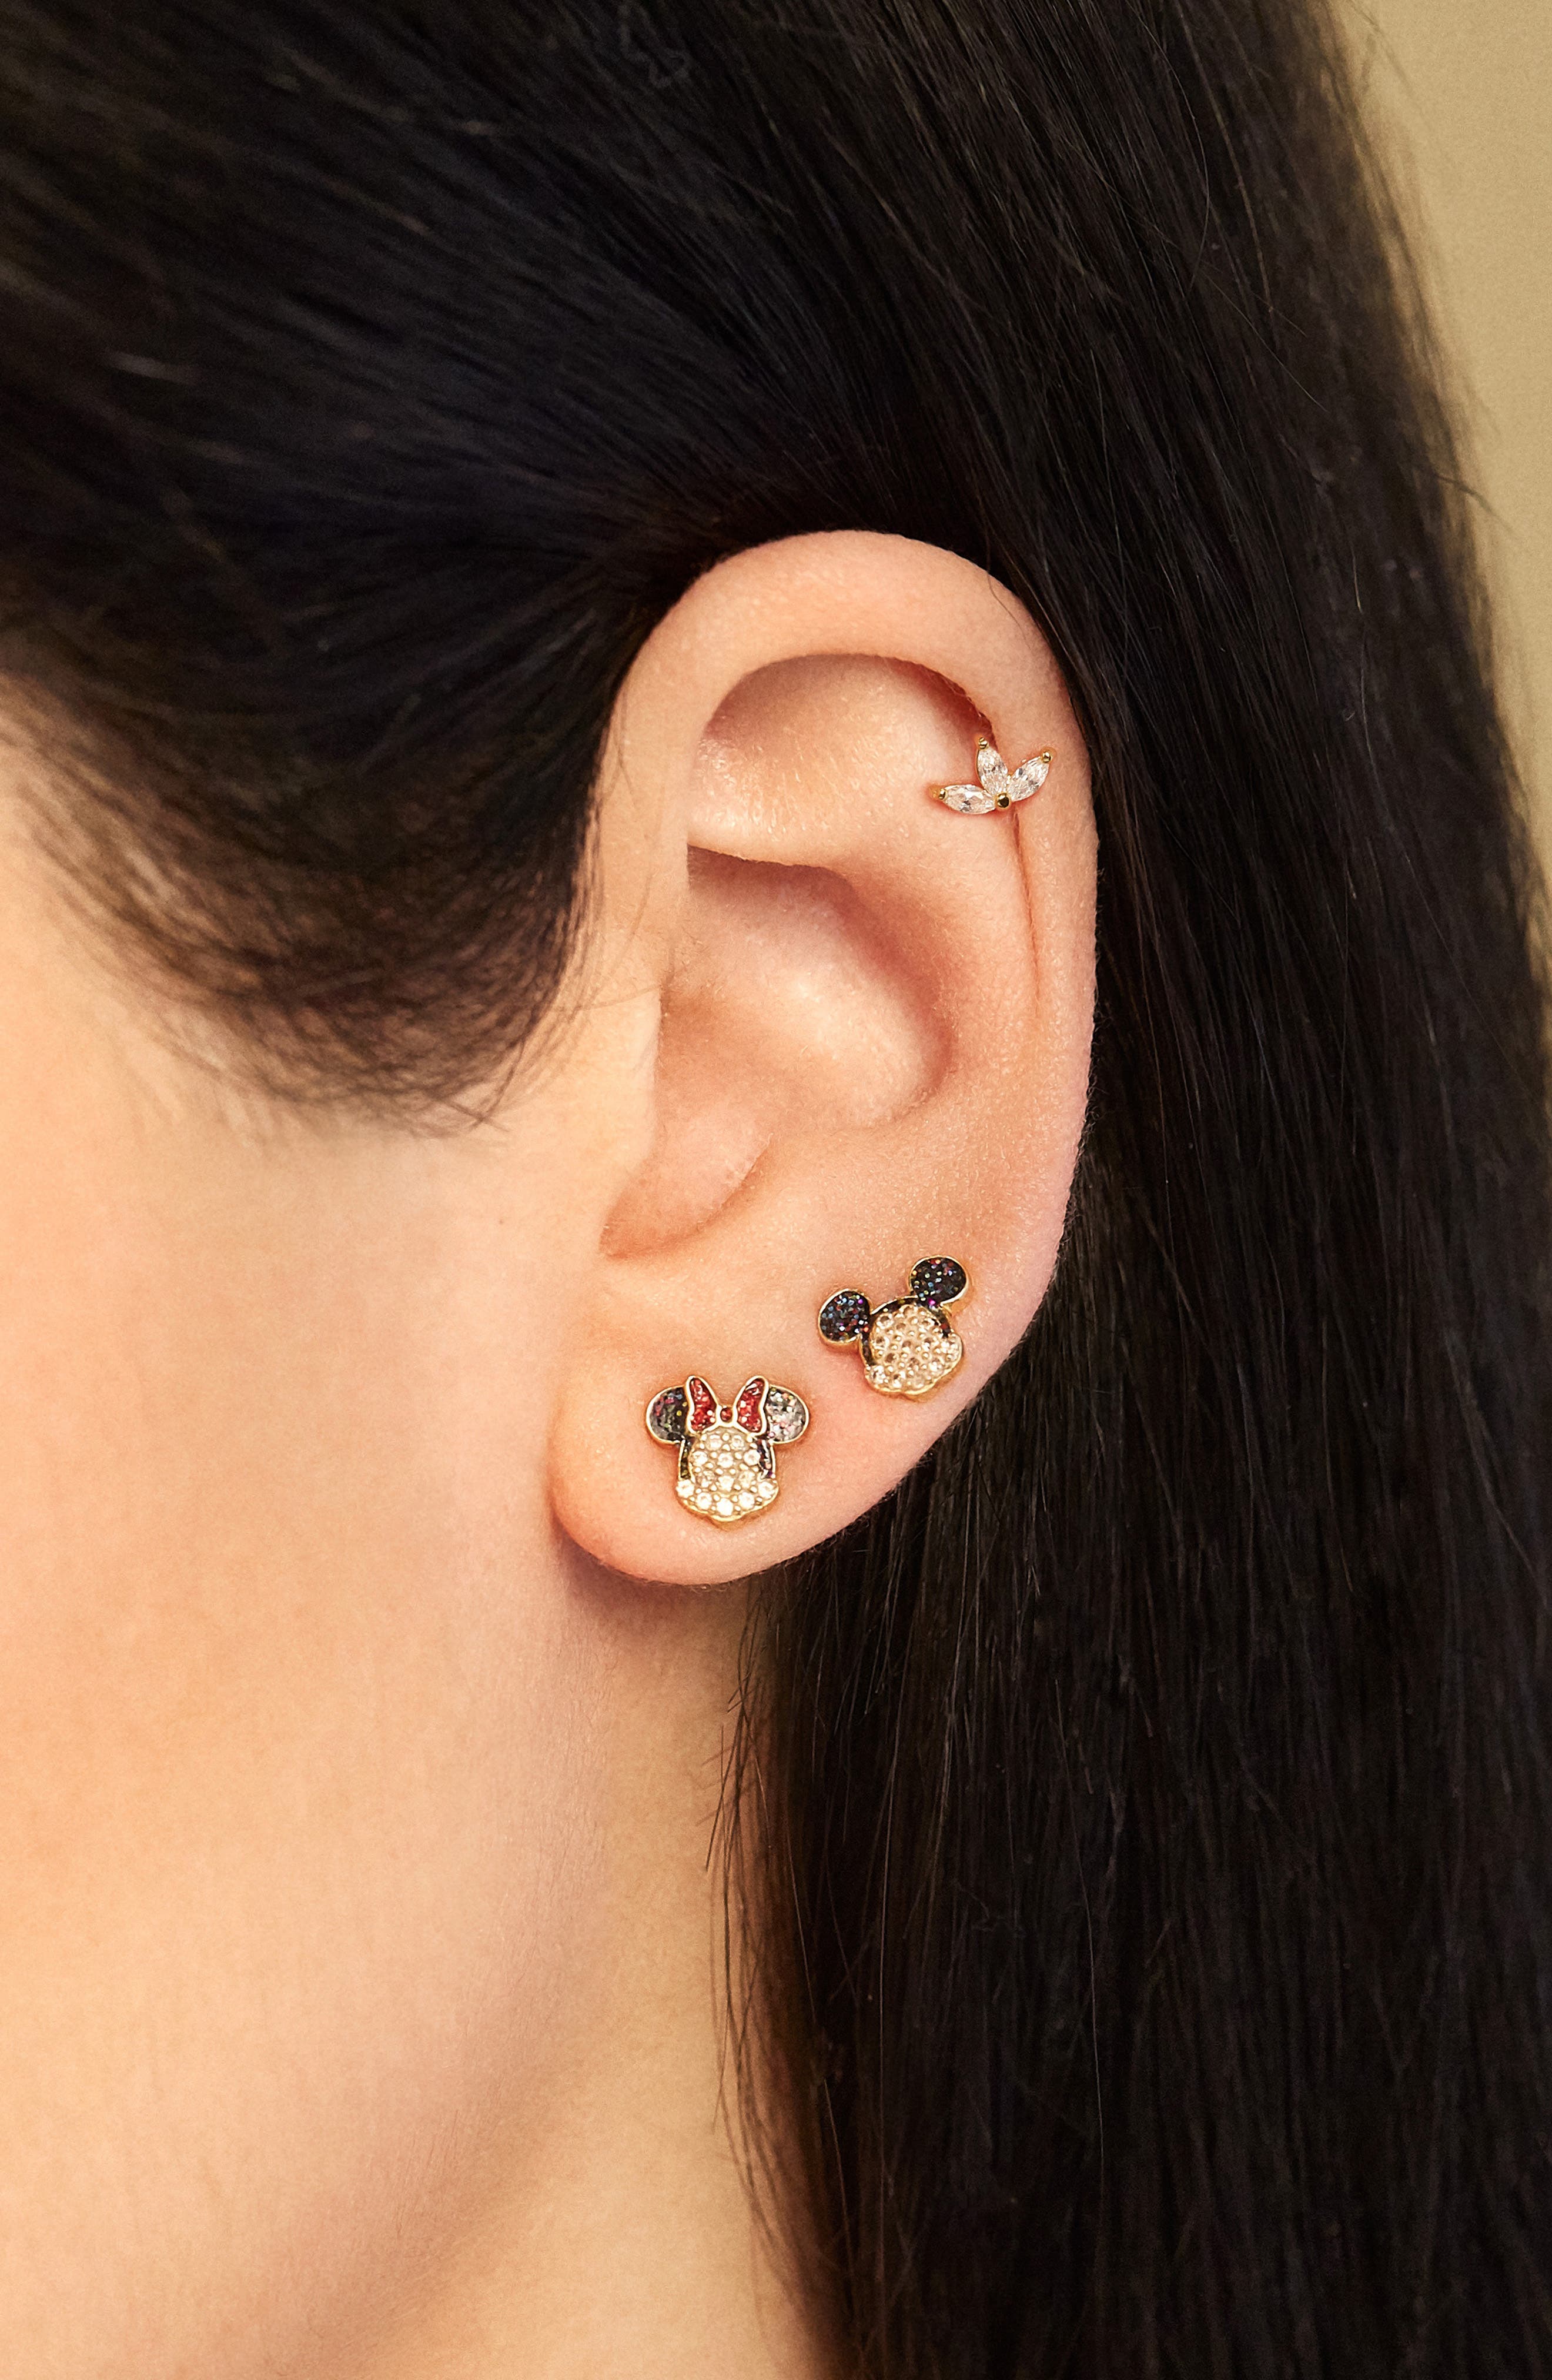 Sold Individually Inspiration Dezigns 3 Star CZ Fan Add On Earring/Cartilage Barbell Jacket 